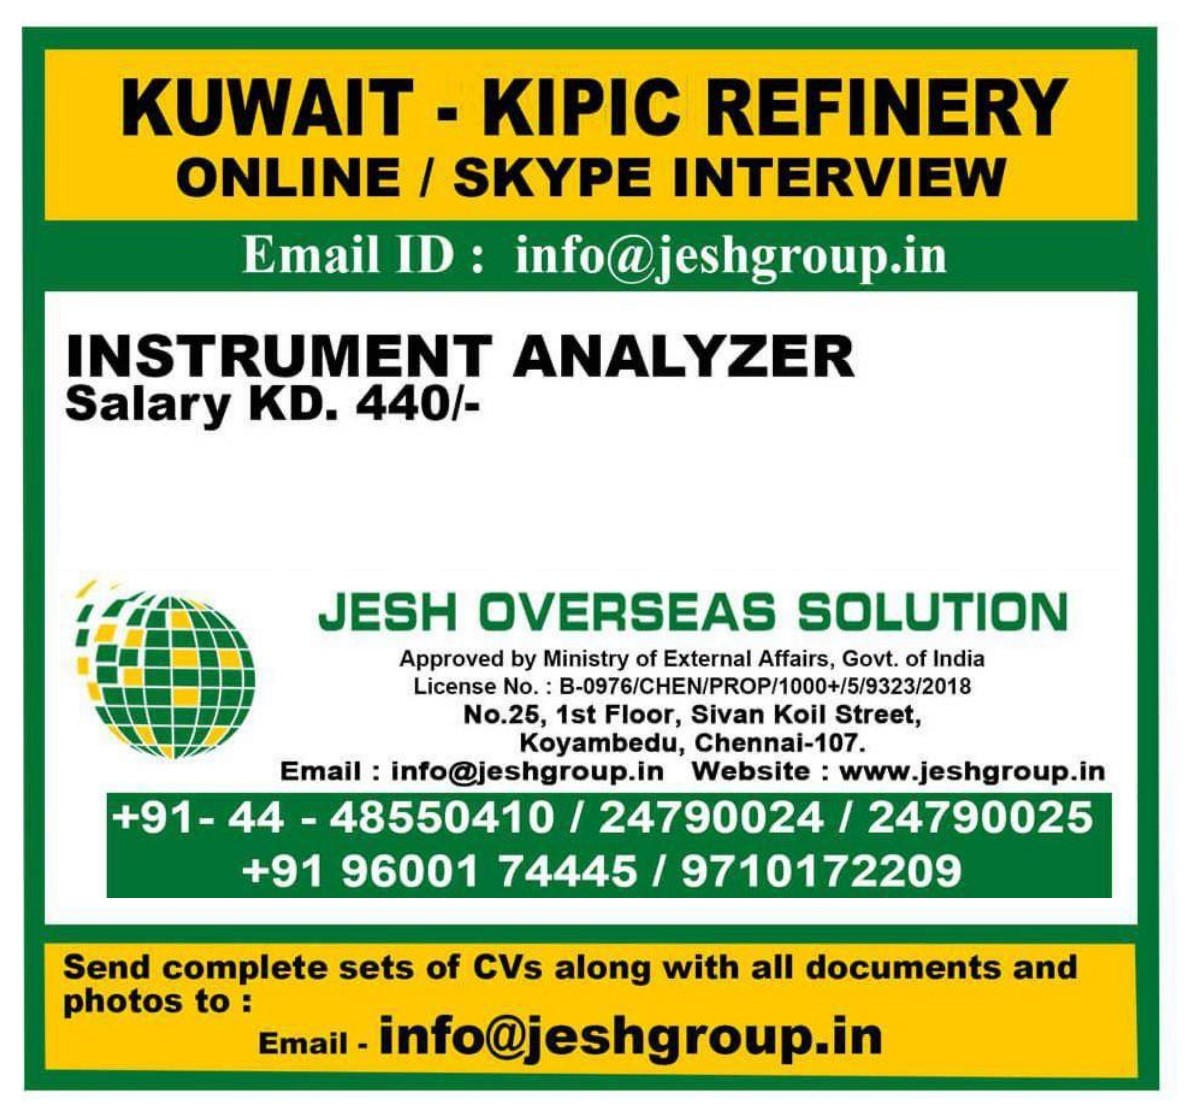 Skype Interview for Kuwait